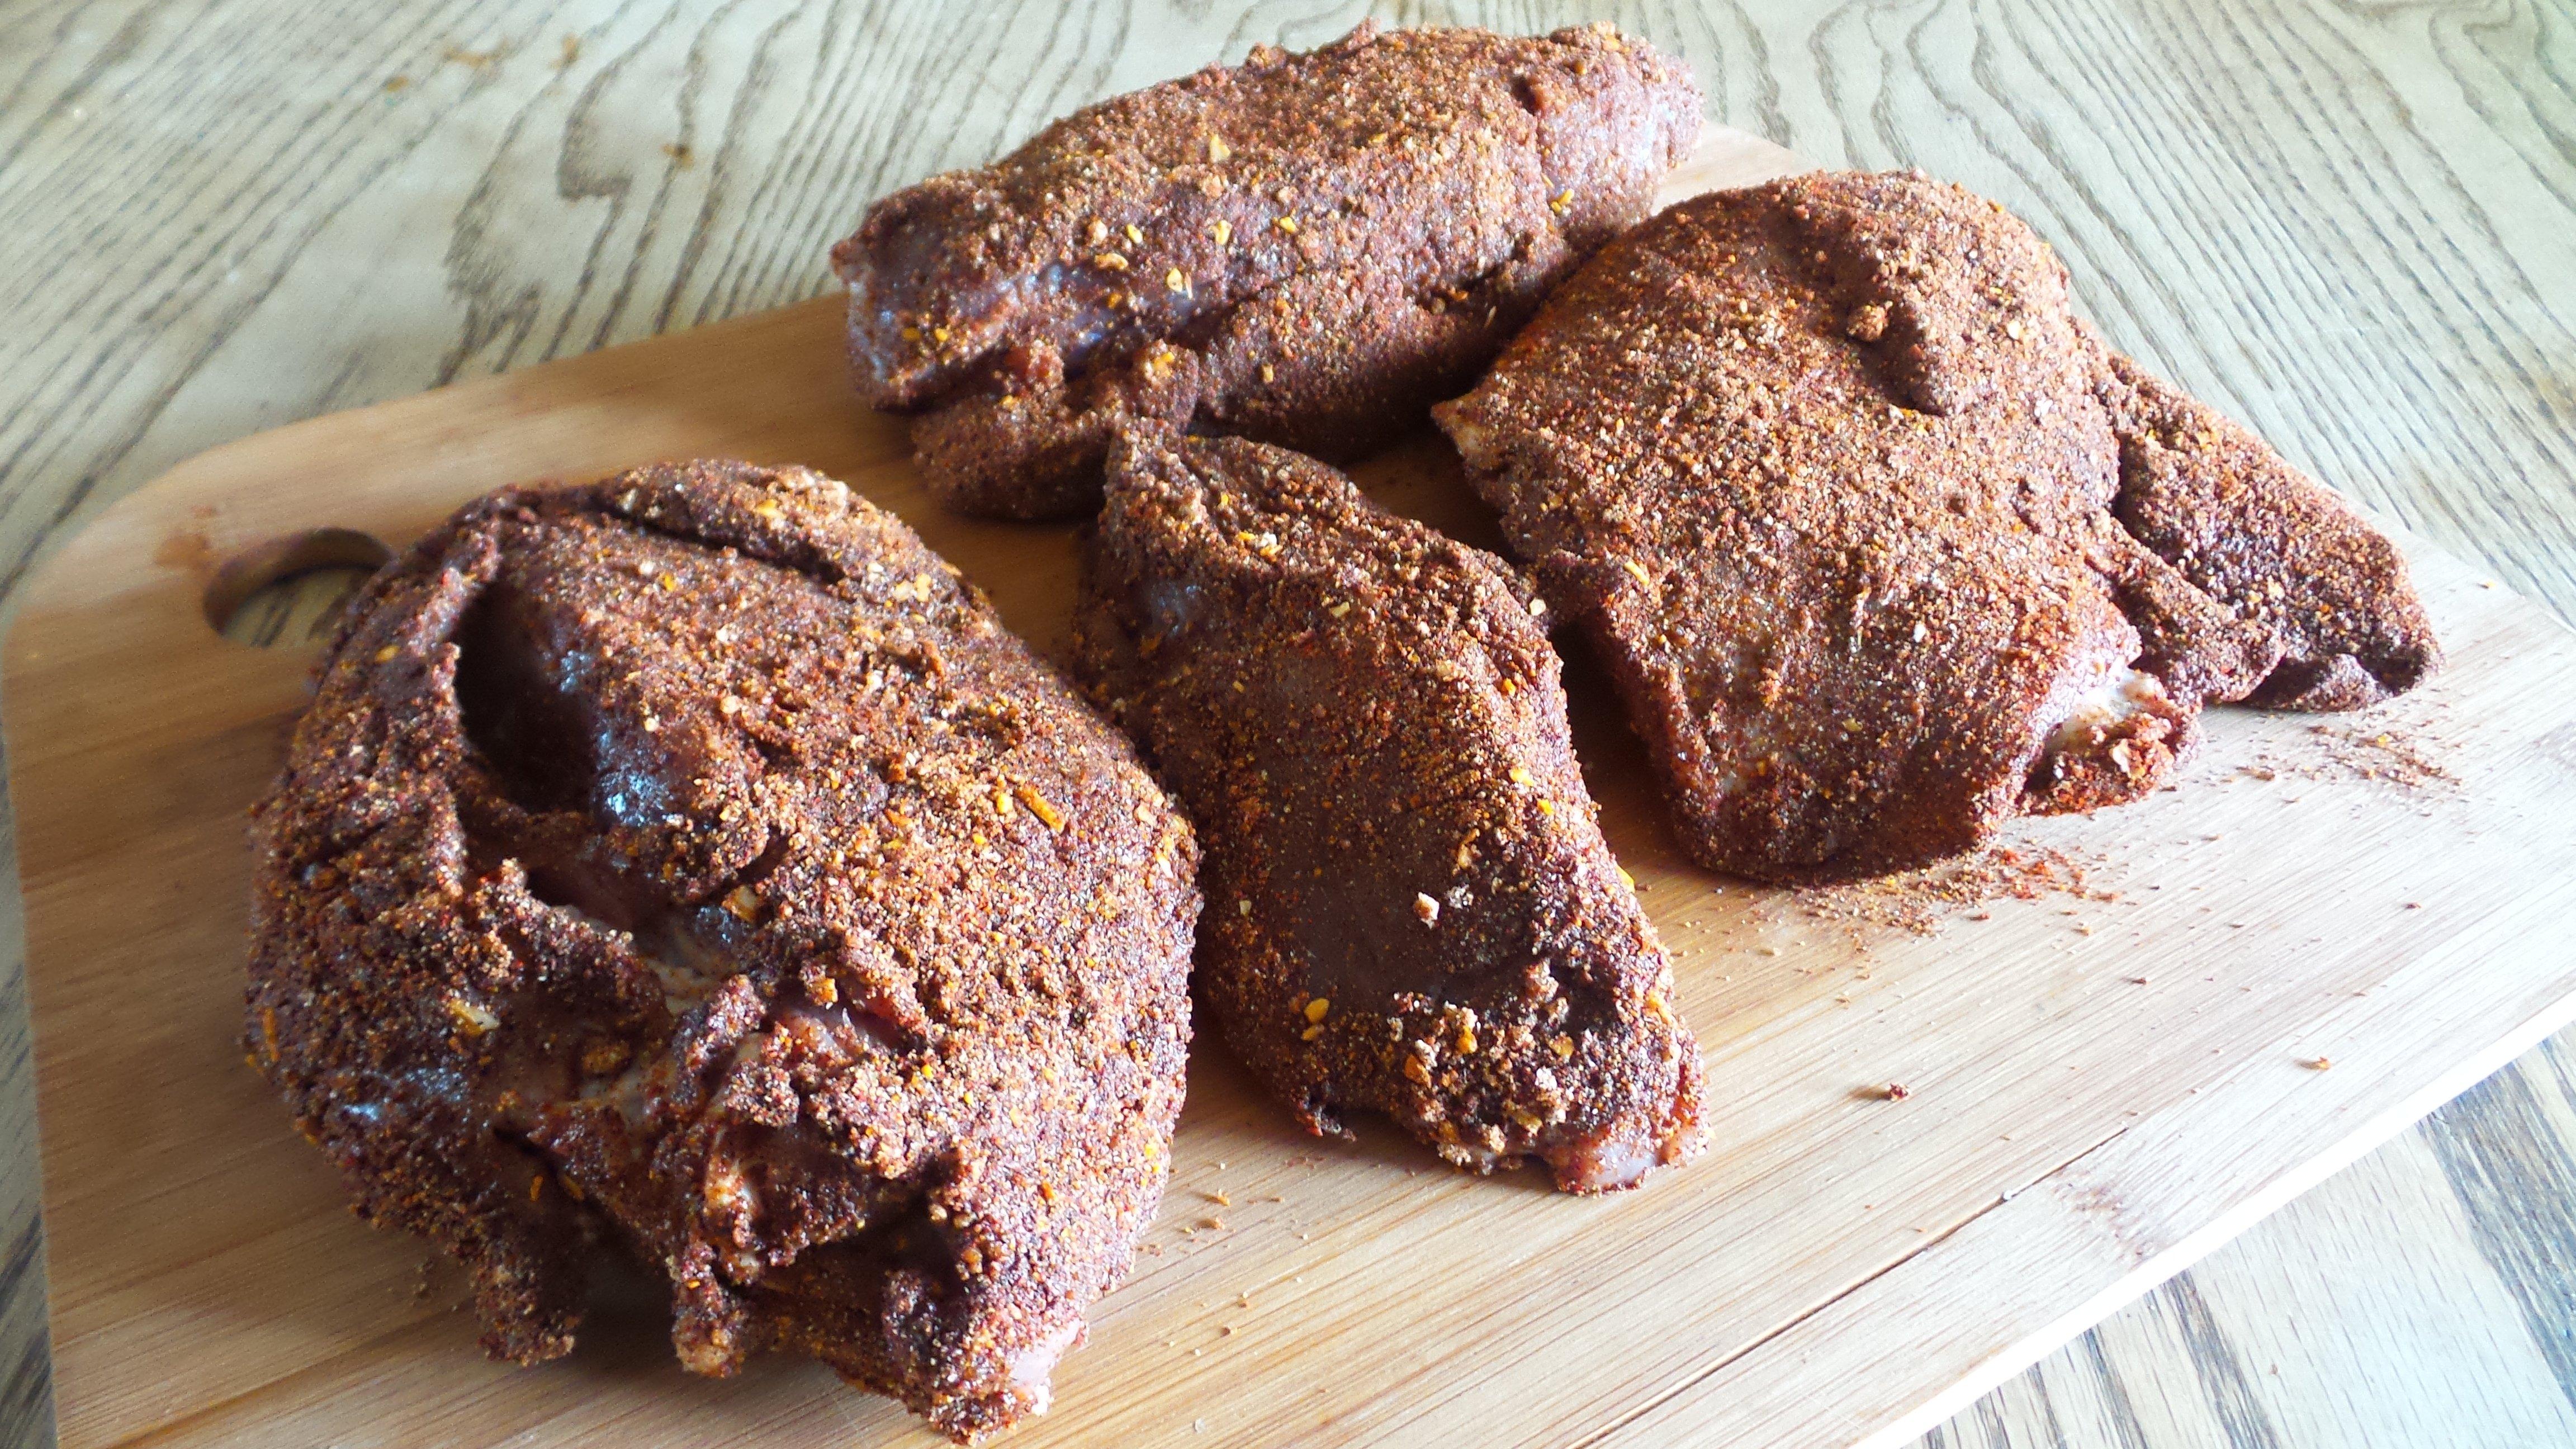 Apply a thick coating of the dry rub to the venison before smoking.